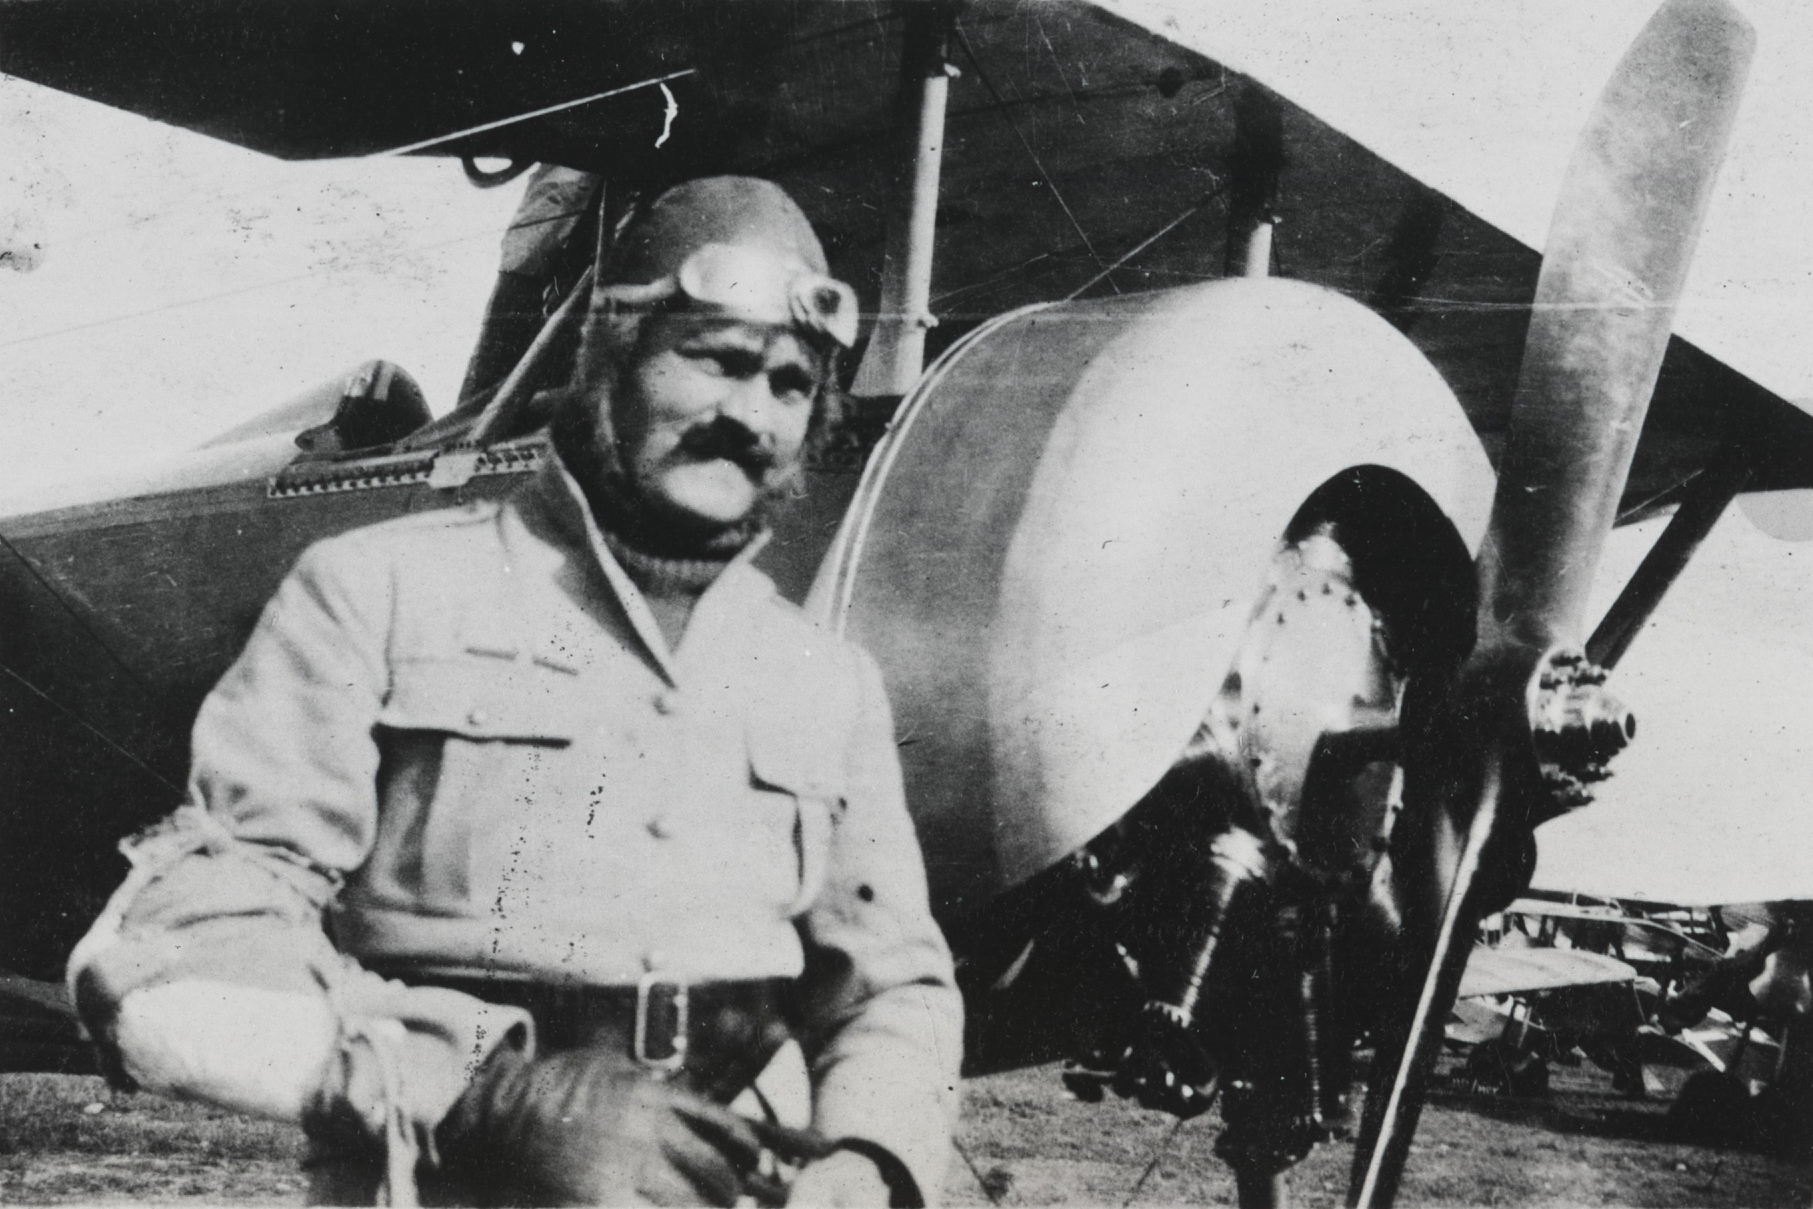 William_Thaw%2C_right_arm_in_a_cast%2C_member_of_the_Lafayette_Escadrille_stands_in_front_of_a_Nieuport_XVI.jpg